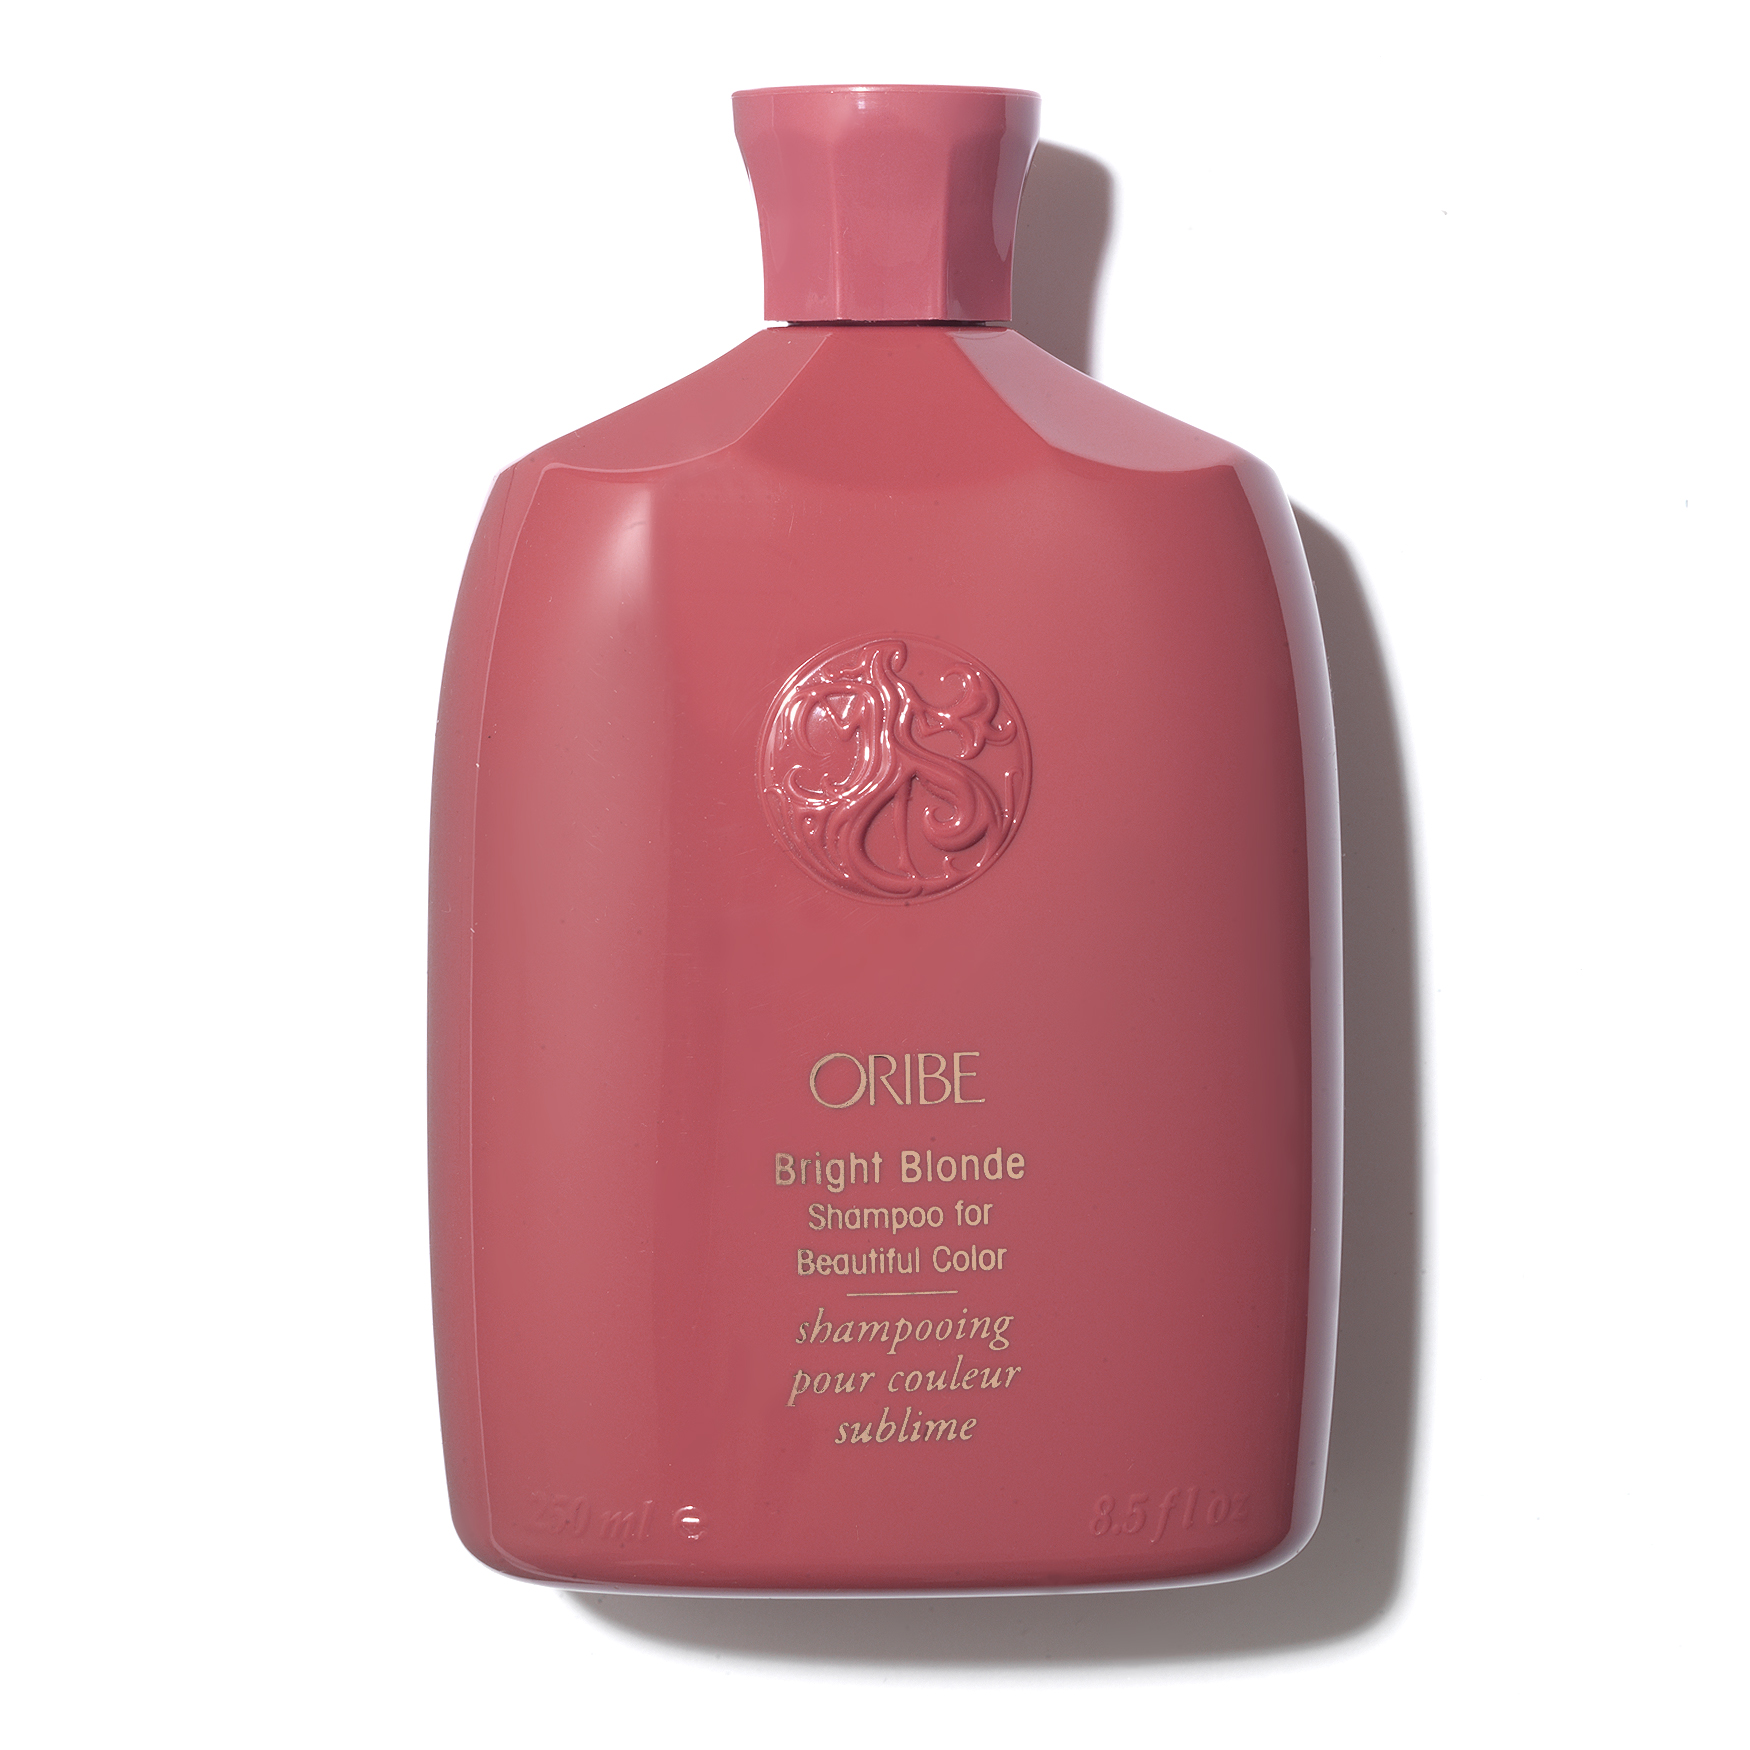 Oribe Bright Blonde Shampoo for Beautiful Color | Space NK